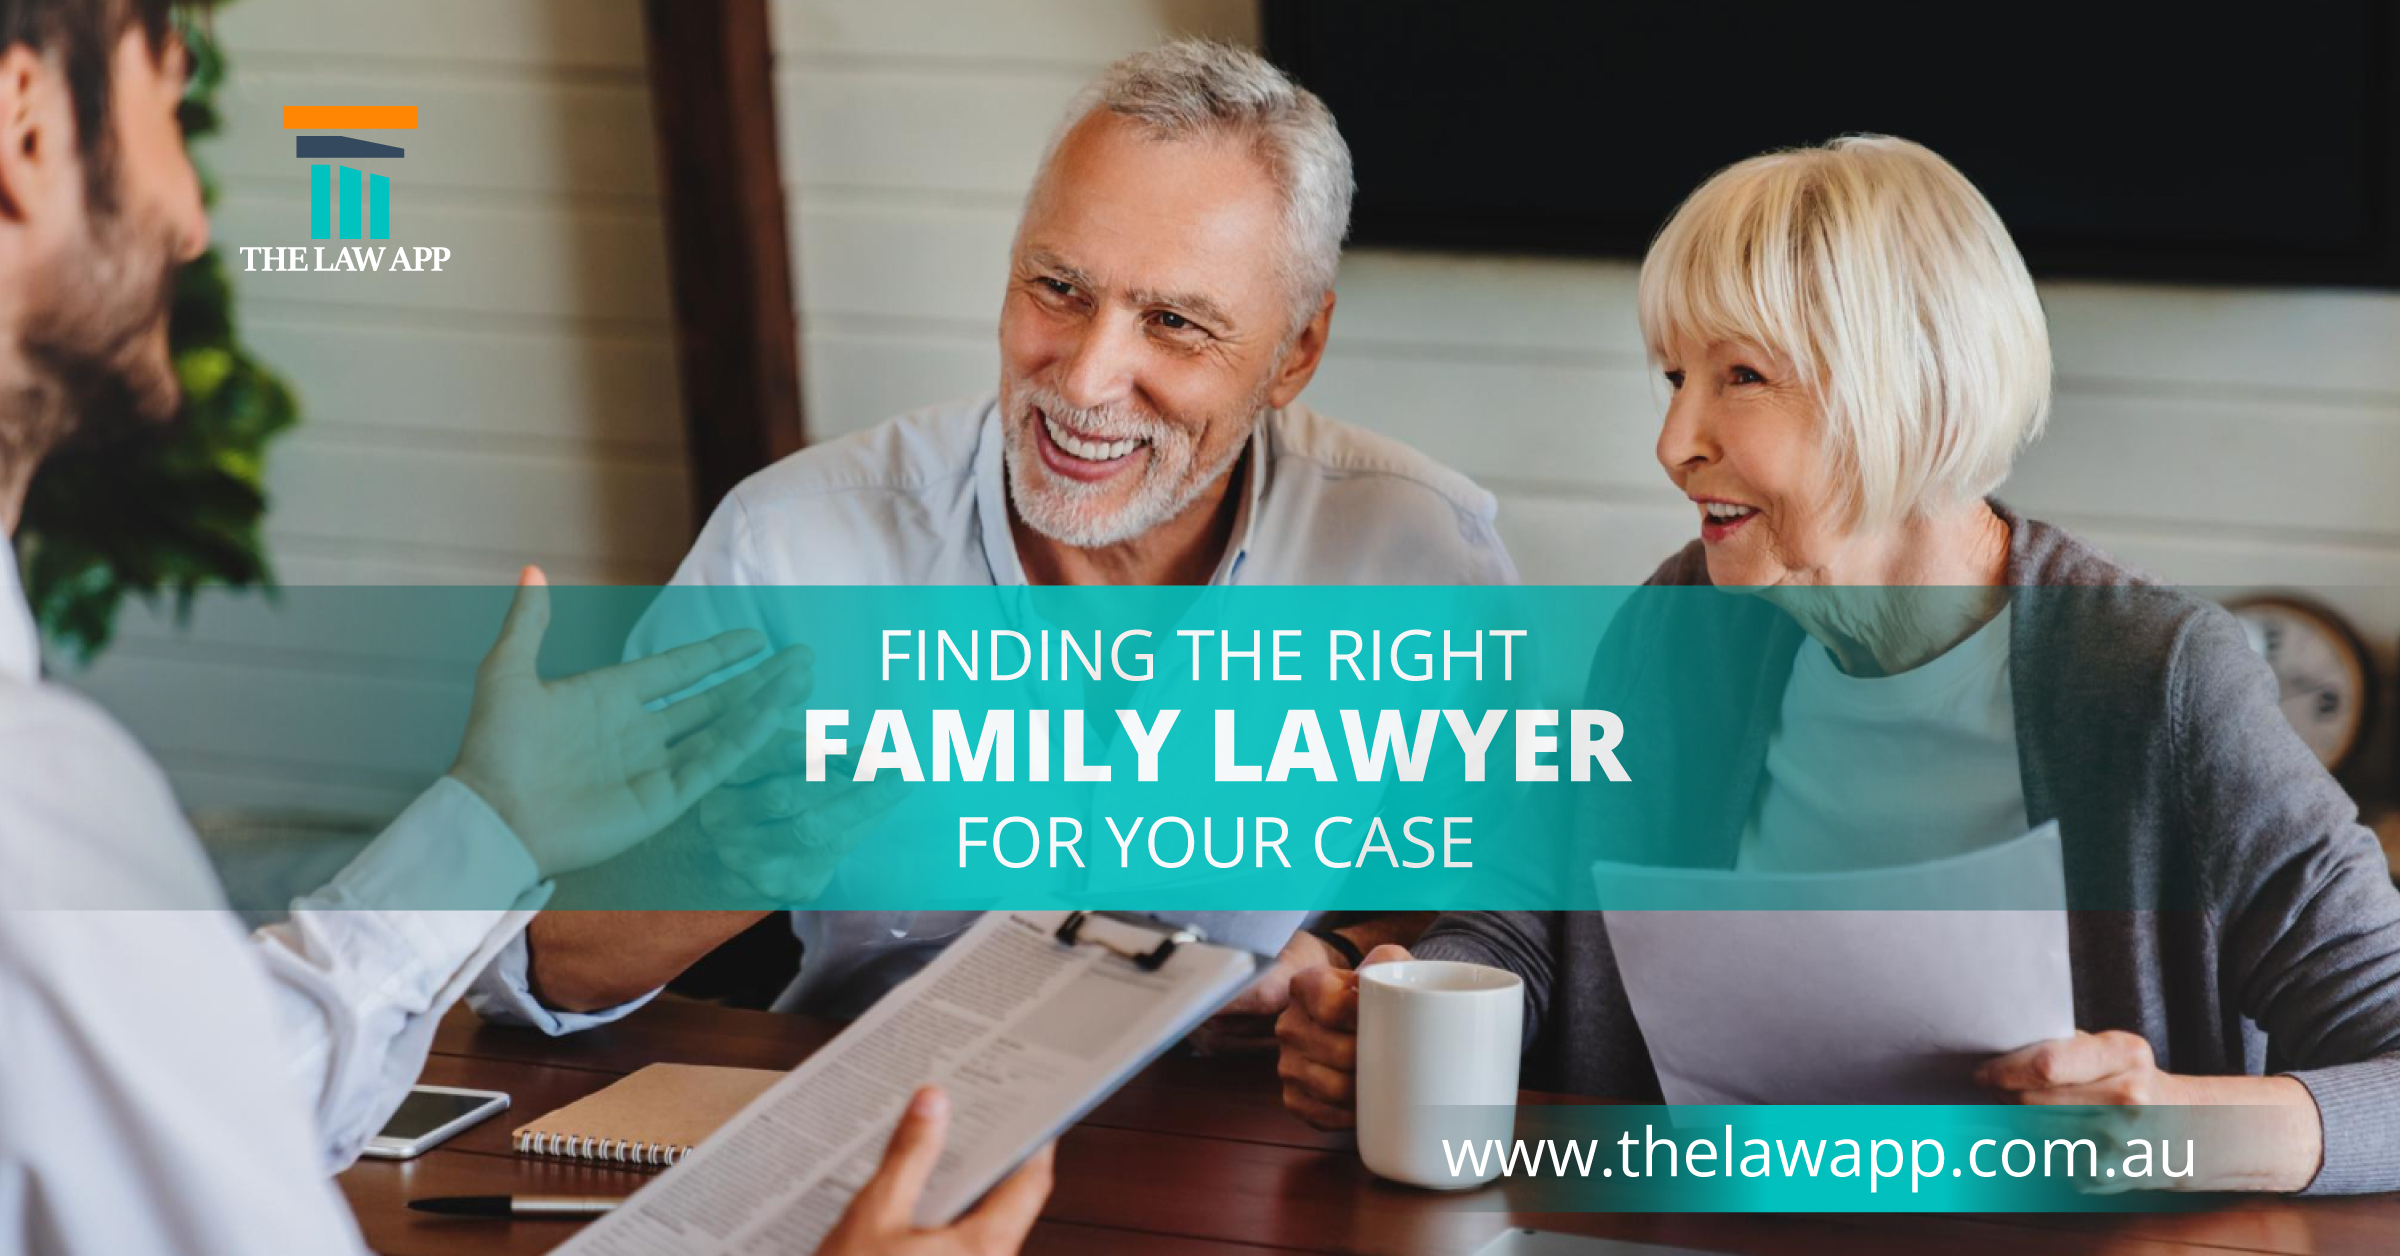 Finding the Right Family Lawyer for Your Case